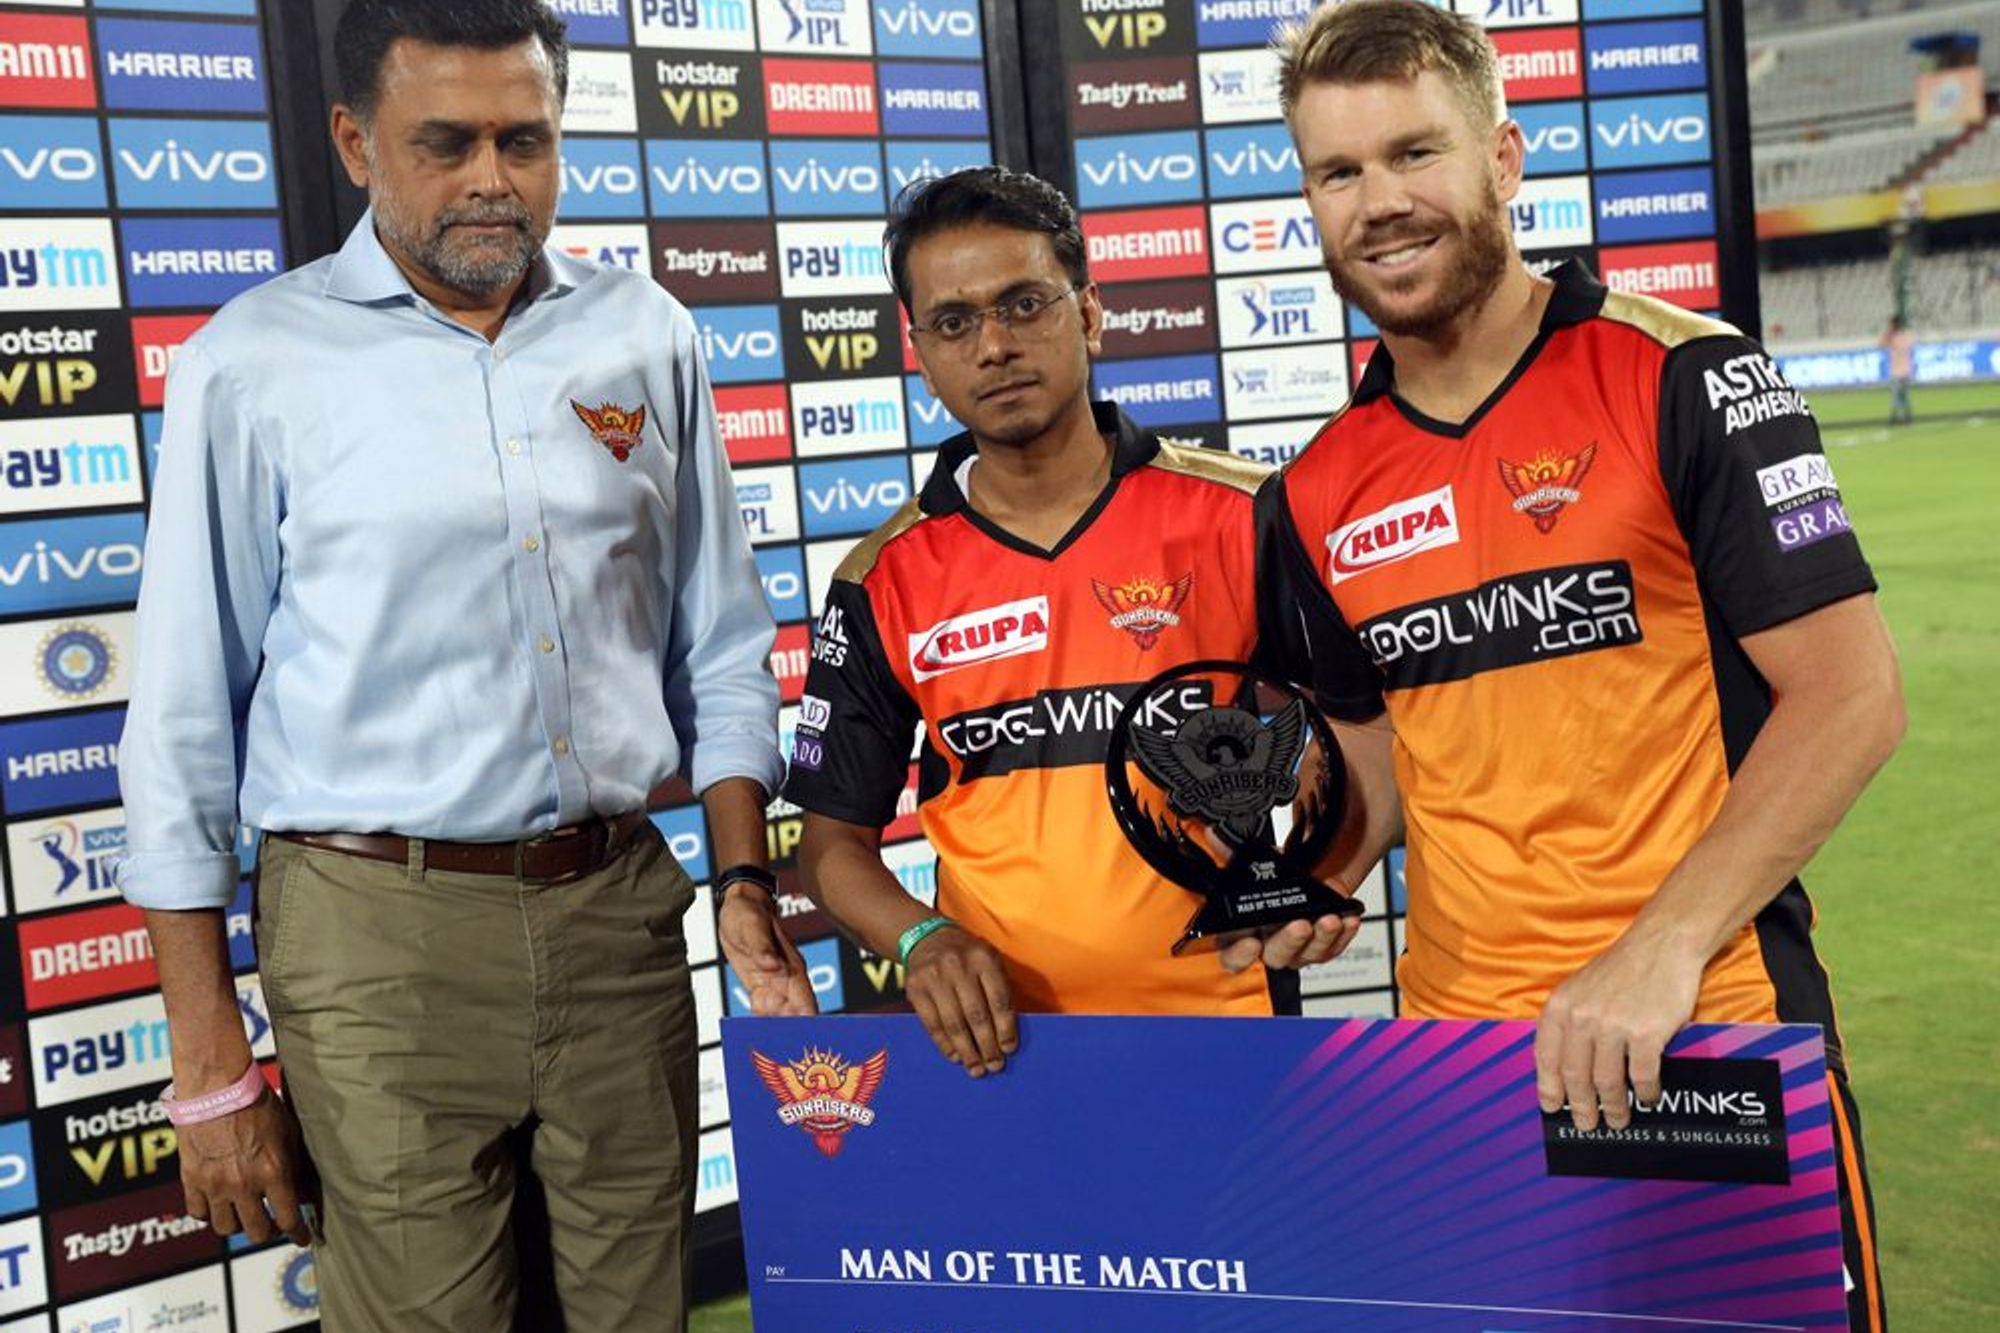 David Warner shares the record of 17 MoM wins in IPL with Rohit and Dhoni